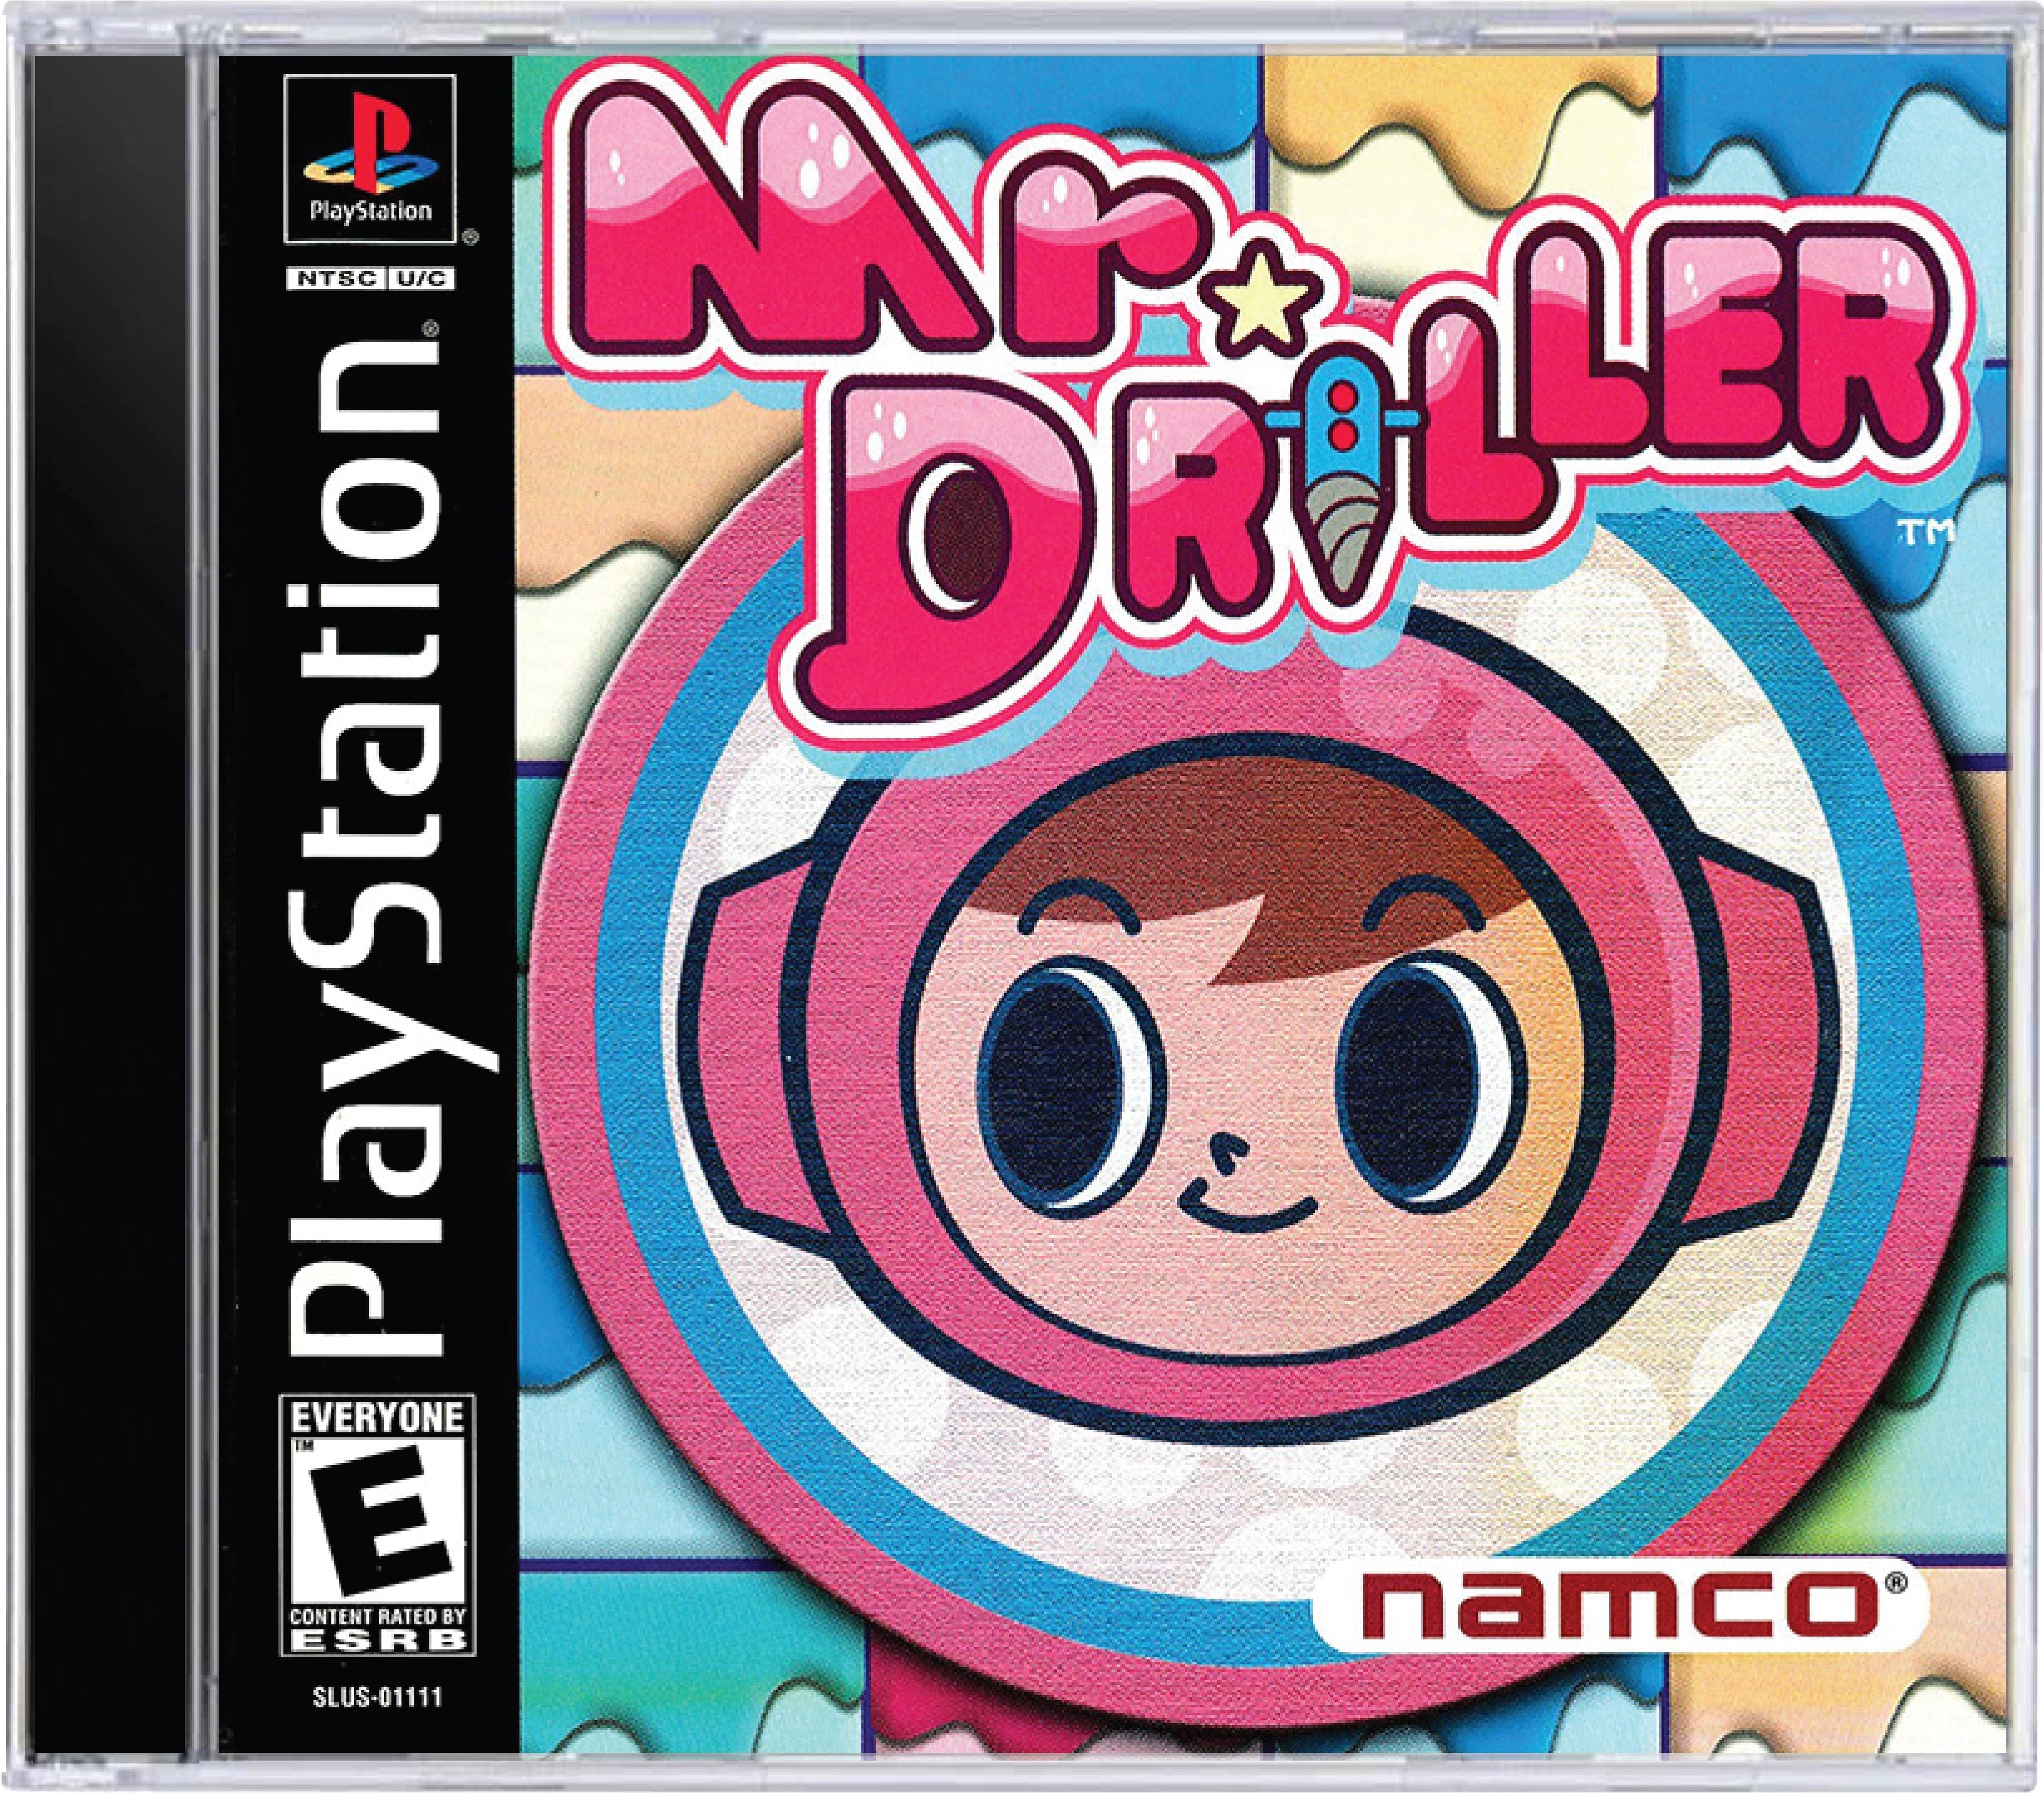 Mr. Driller Cover Art and Product Photo